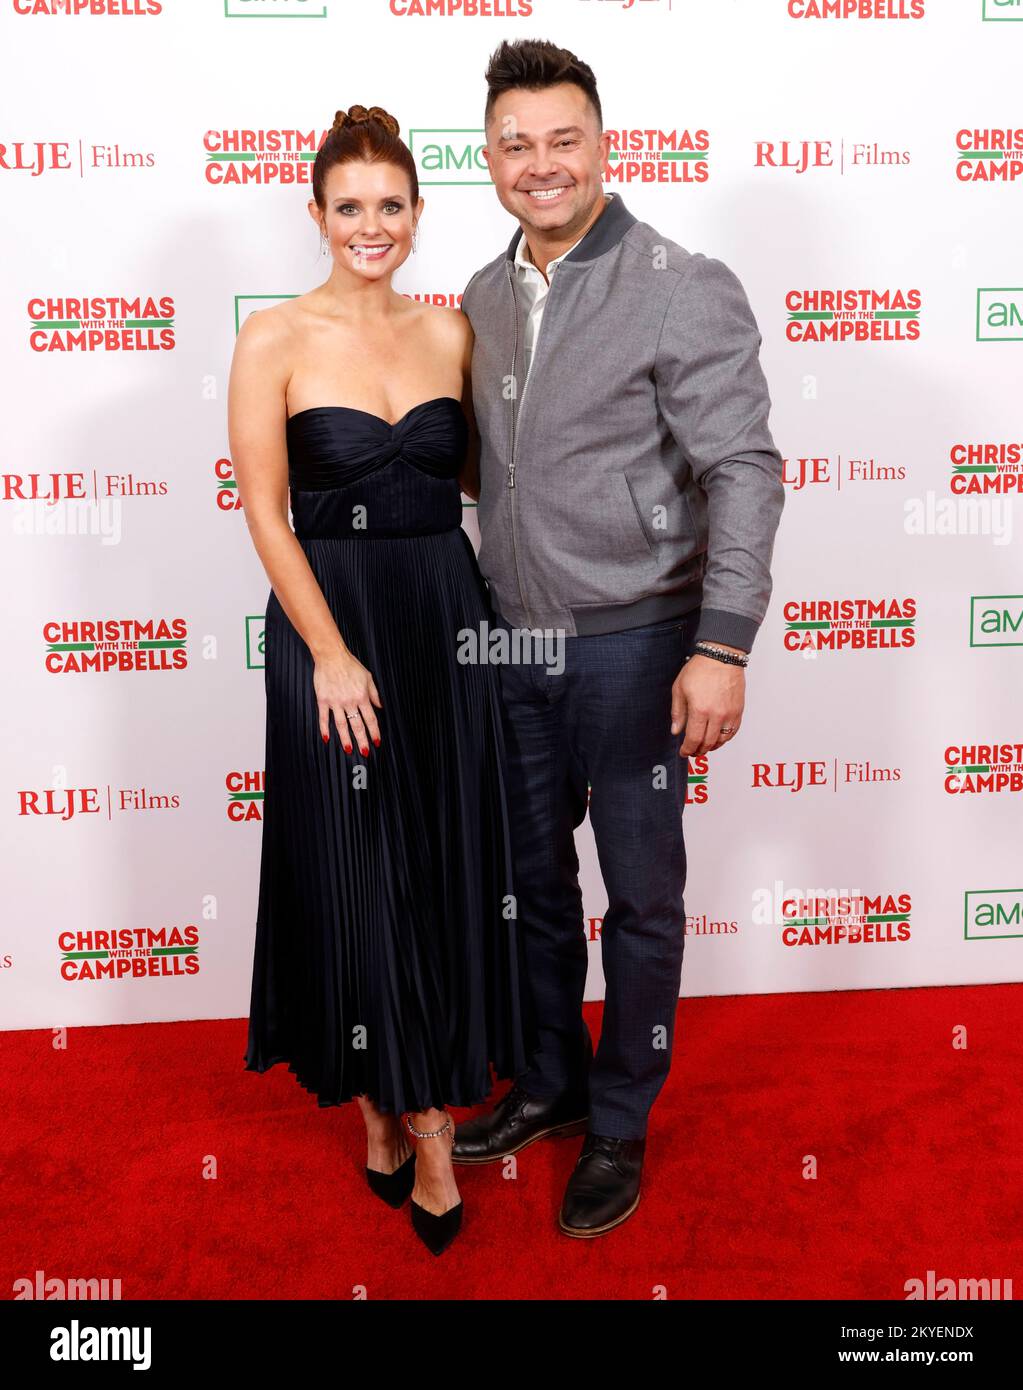 Los Angeles, USA. 30th Nov, 2022. Los Angeles, CA, - Nov 29, 2022: JoAnna Garcia Swisher and Nick Swisher arrive at the movie premiere of 'Christmas With The Campbells' at The Edition West Hollywood Credit: Ovidiu Hrubaru/Alamy Live News Stock Photo